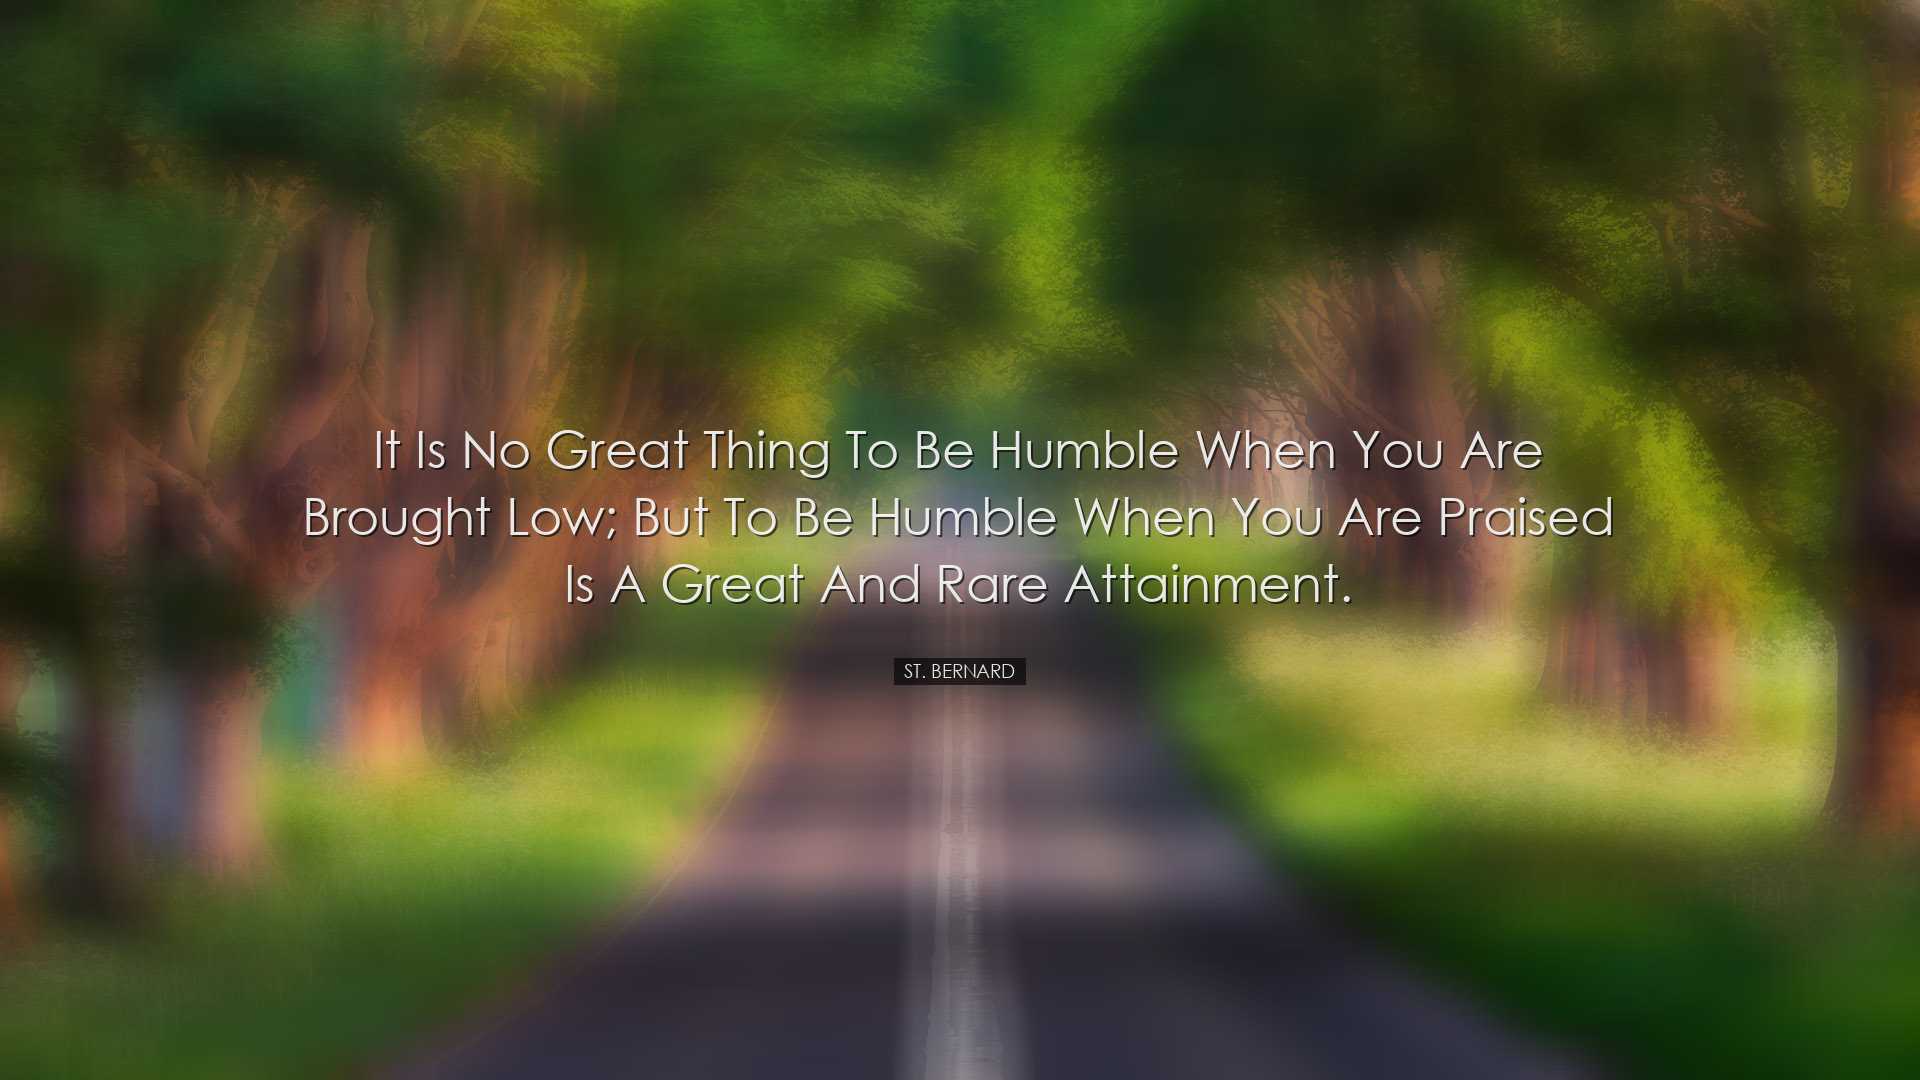 It is no great thing to be humble when you are brought low; but to